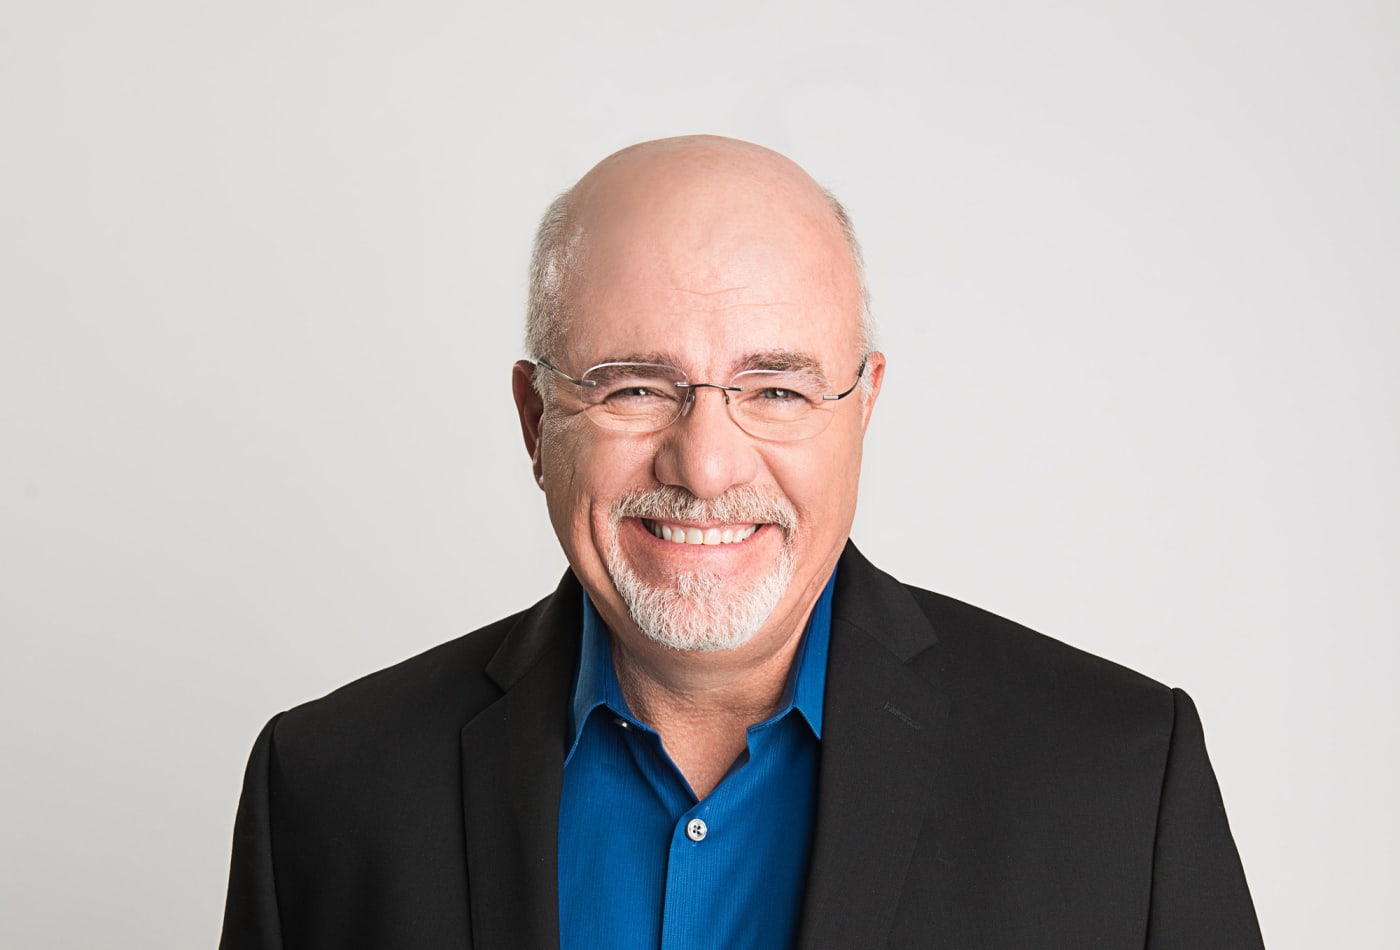 Why Dave Ramsey thinks you should keep living like 'a broke college kid'